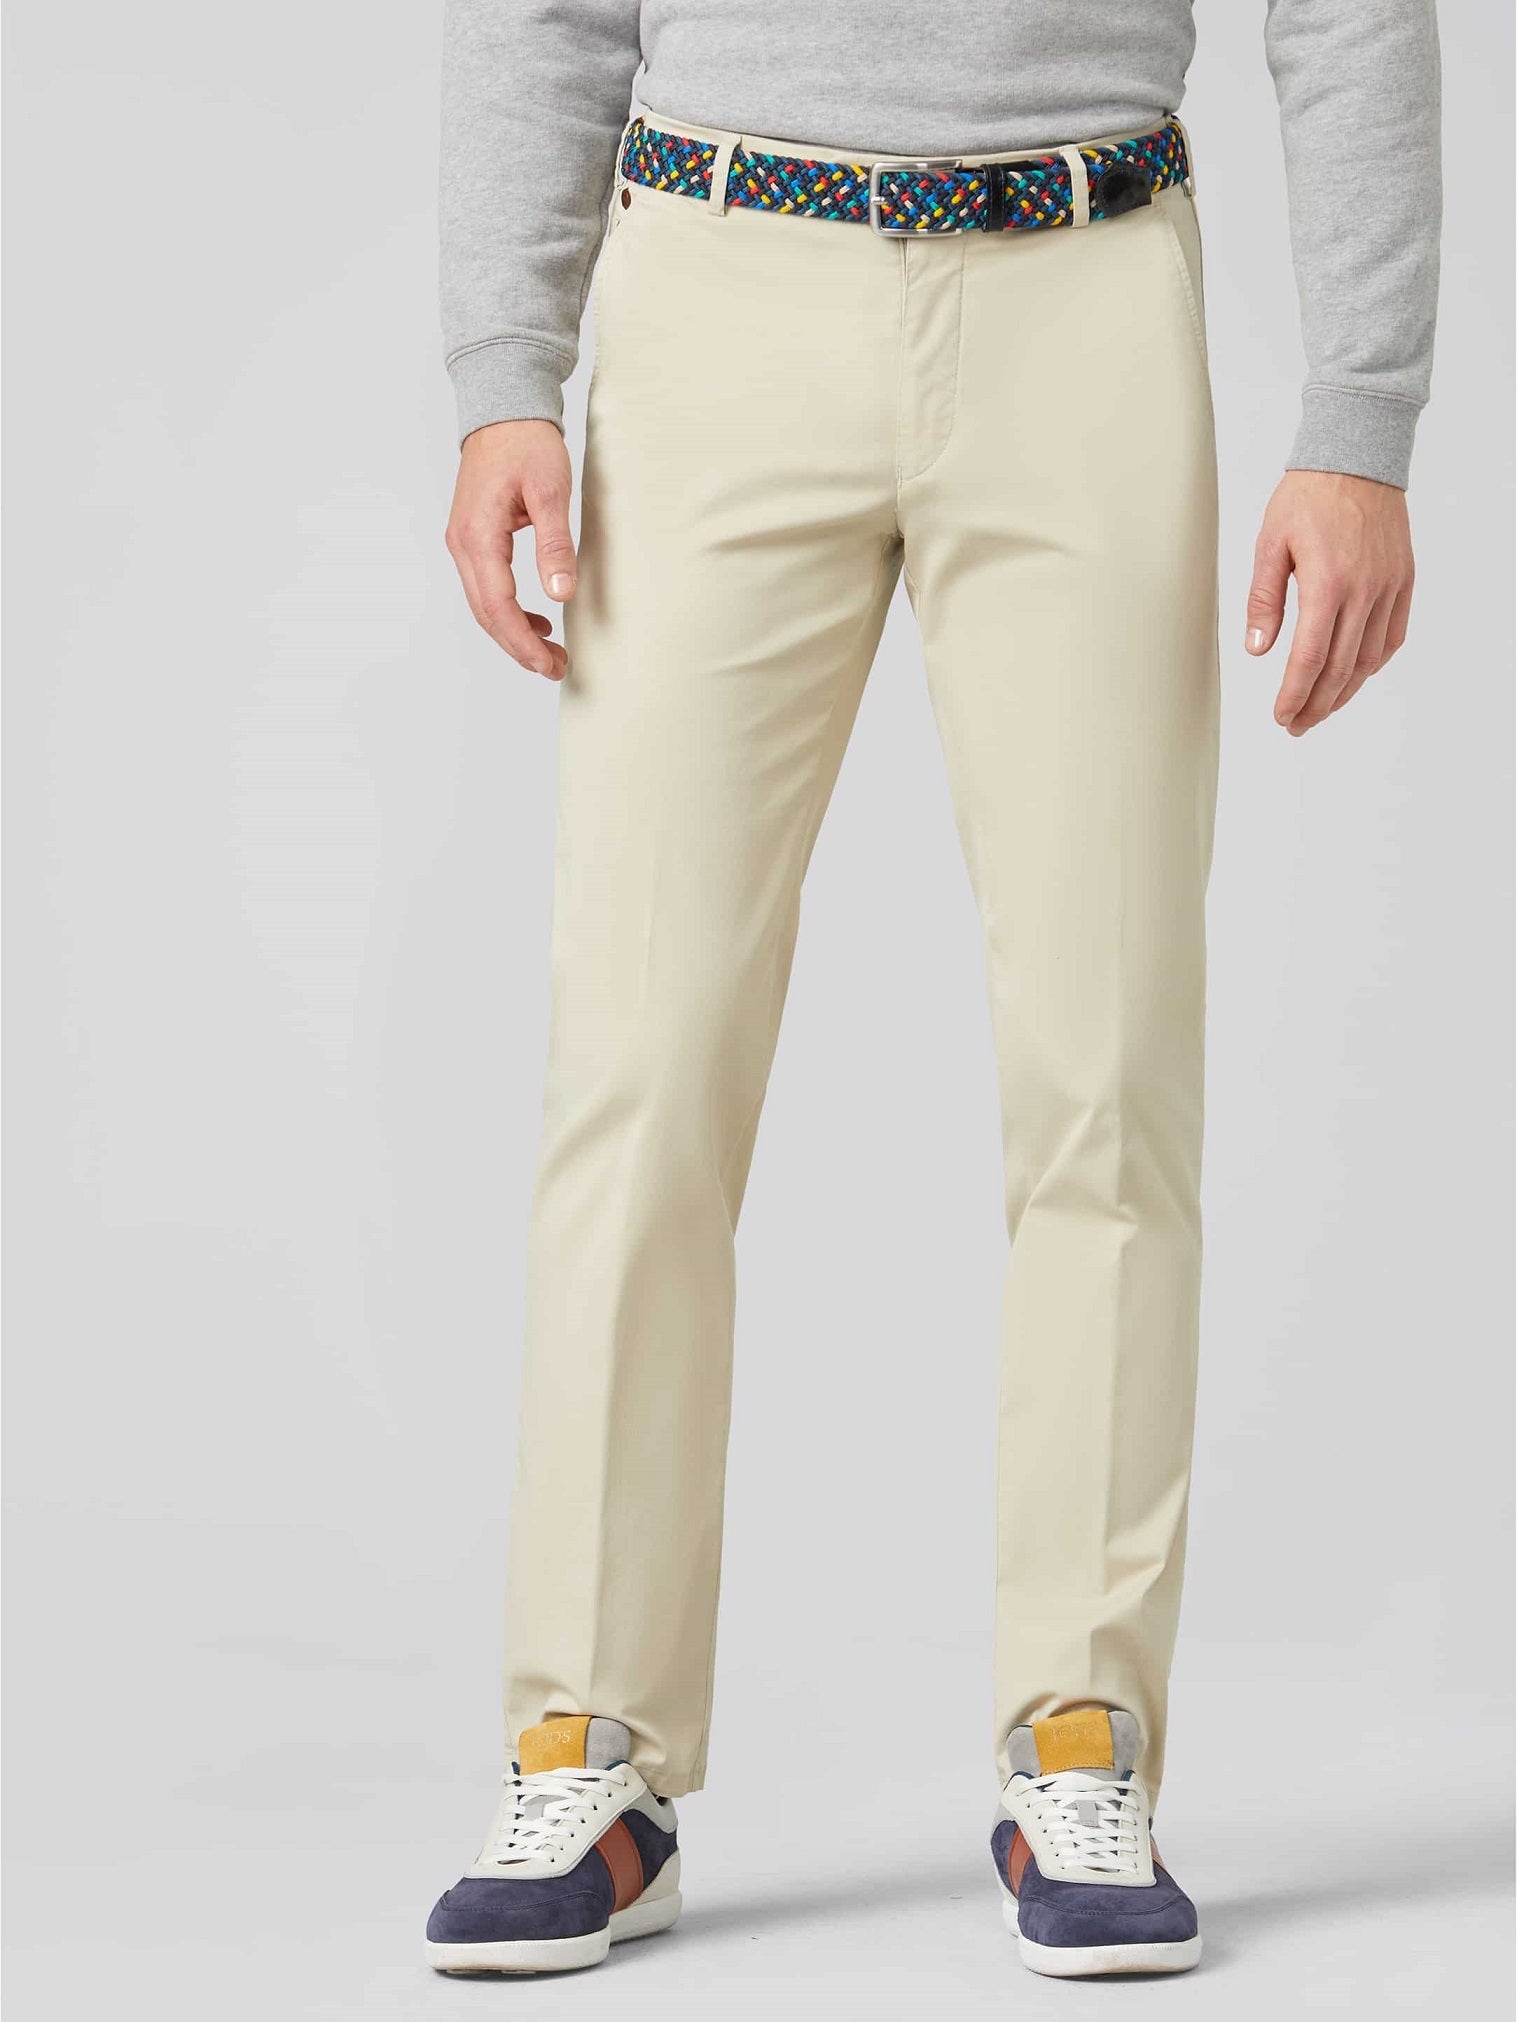 MEYER Trousers - Roma 3001 Light-Weight Cotton Chinos - Beige